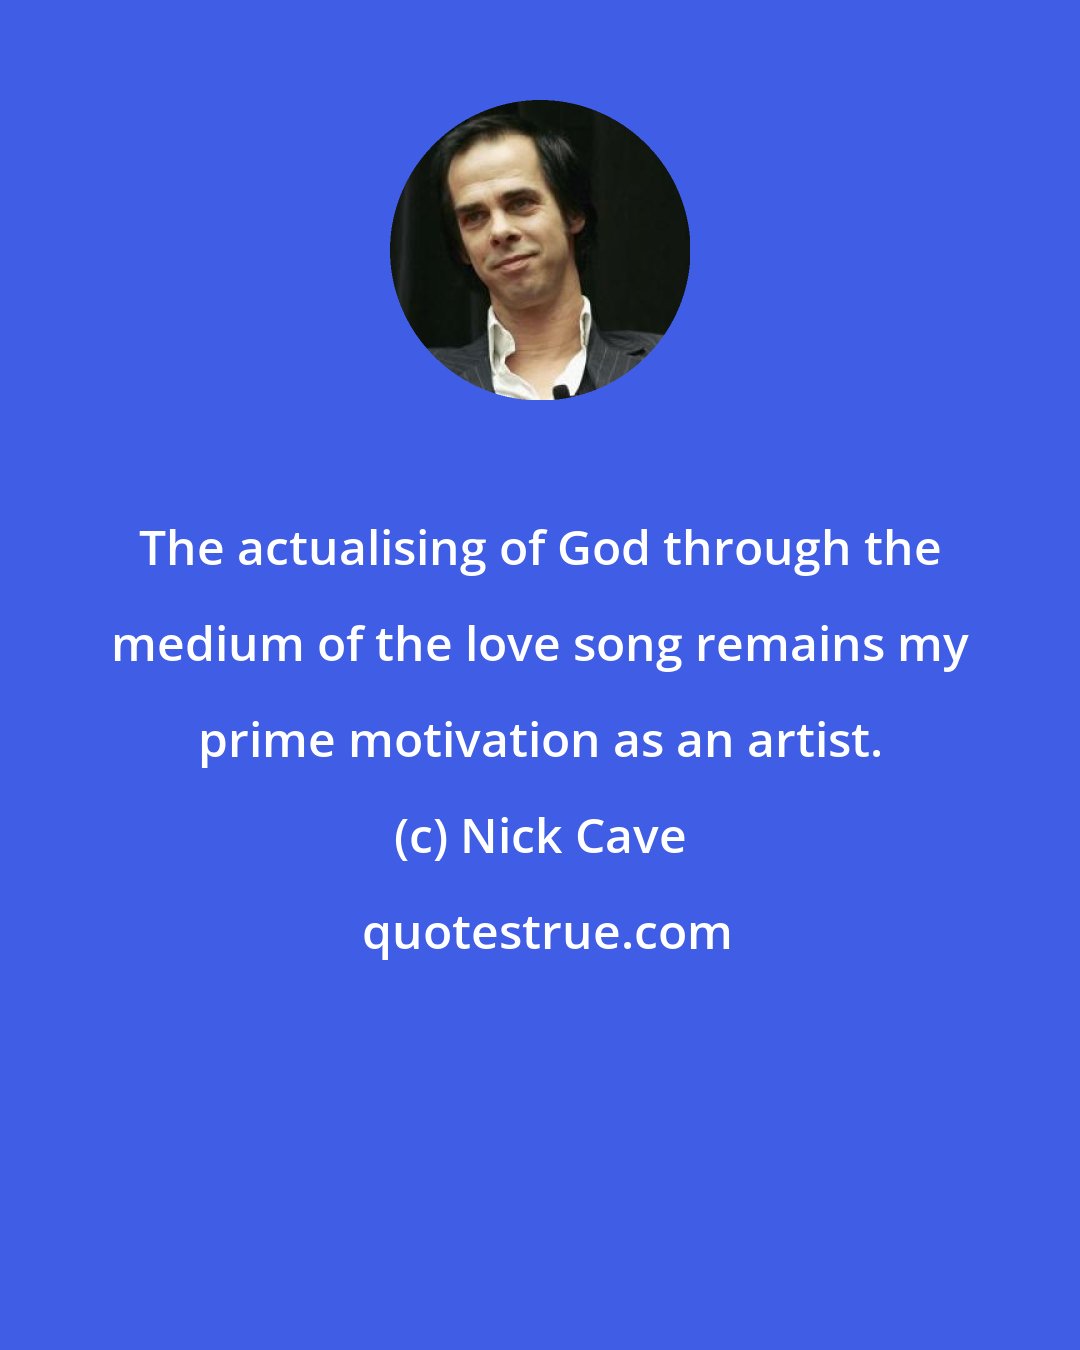 Nick Cave: The actualising of God through the medium of the love song remains my prime motivation as an artist.